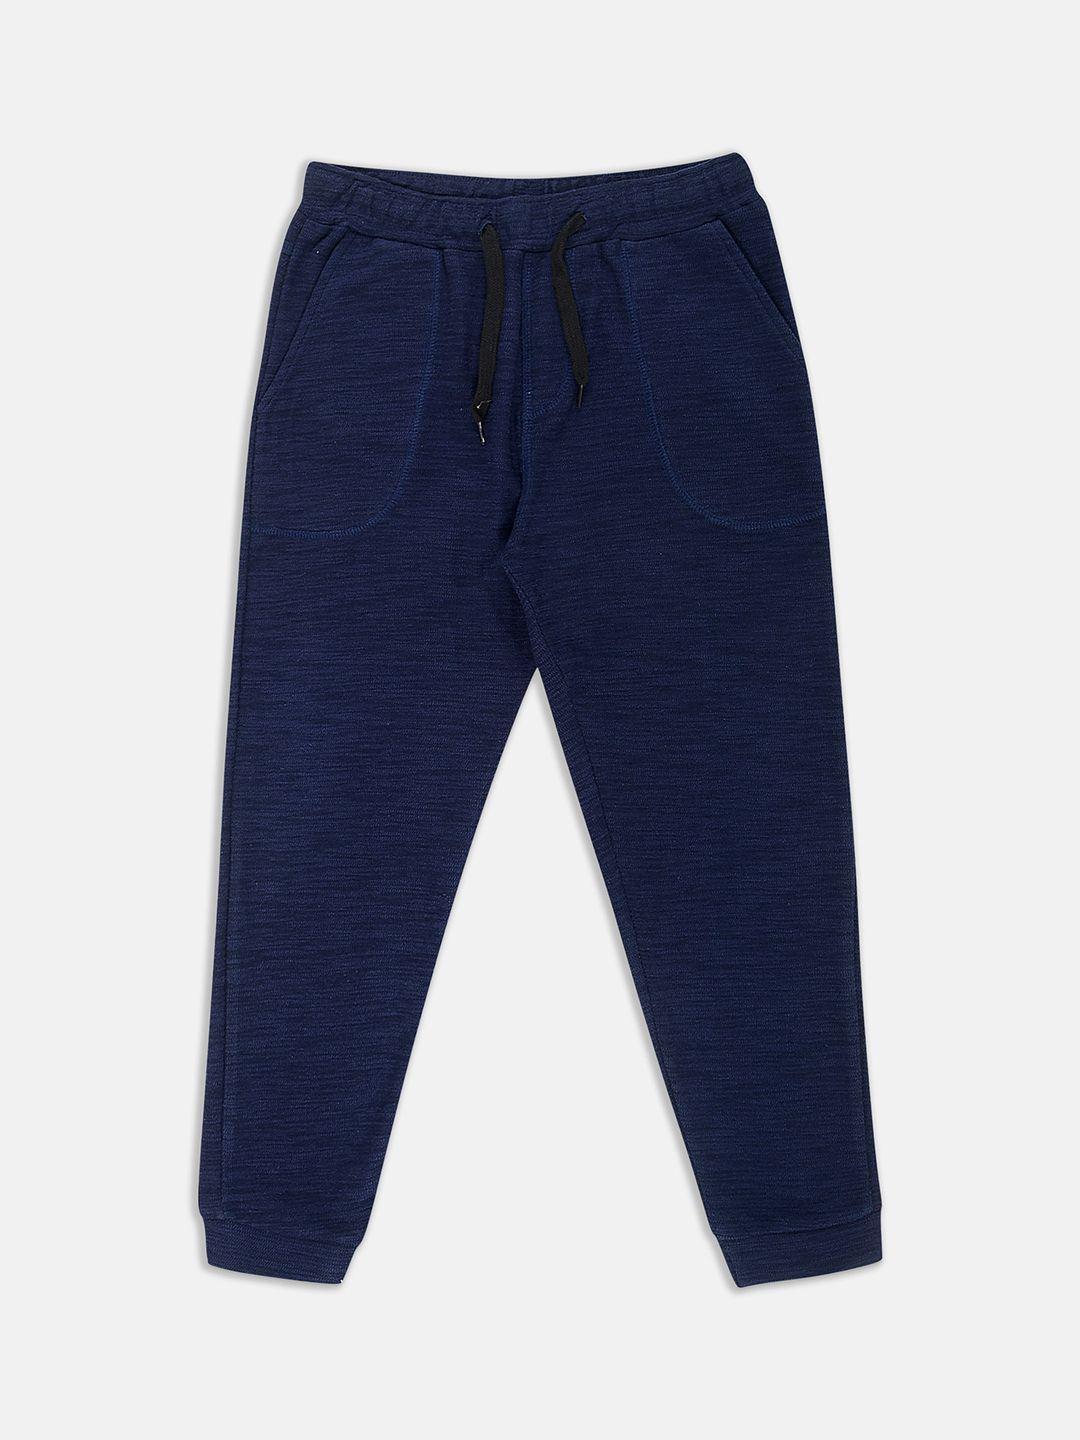 instafab boys navy blue solid cotton joggers